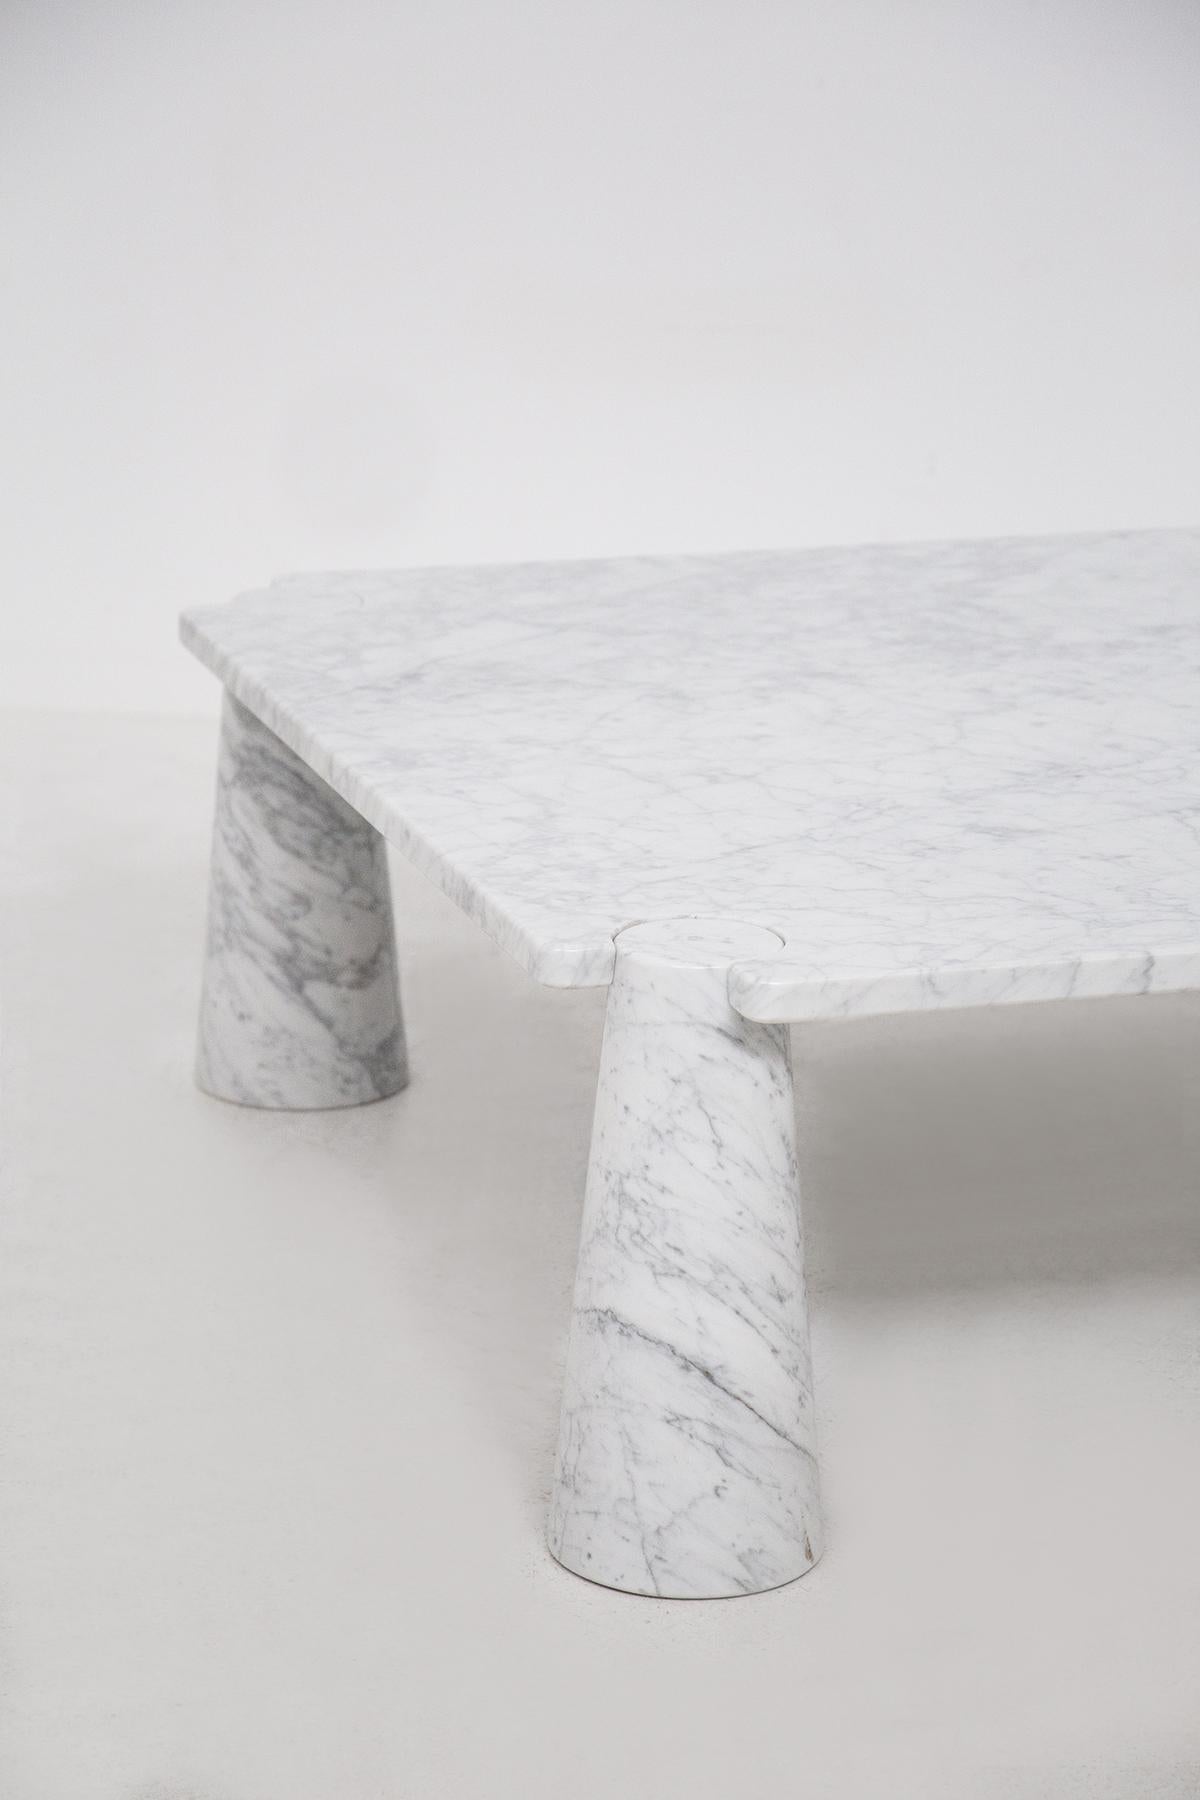 Superb marble side table designed by Angelo Mangiarotti for the prestigious Italian manufacture Skipper, in the 60s and 70s.
The table by Angelo Mangiarotti is totally made of a very precious marble. The top has a square shape, where at each corner